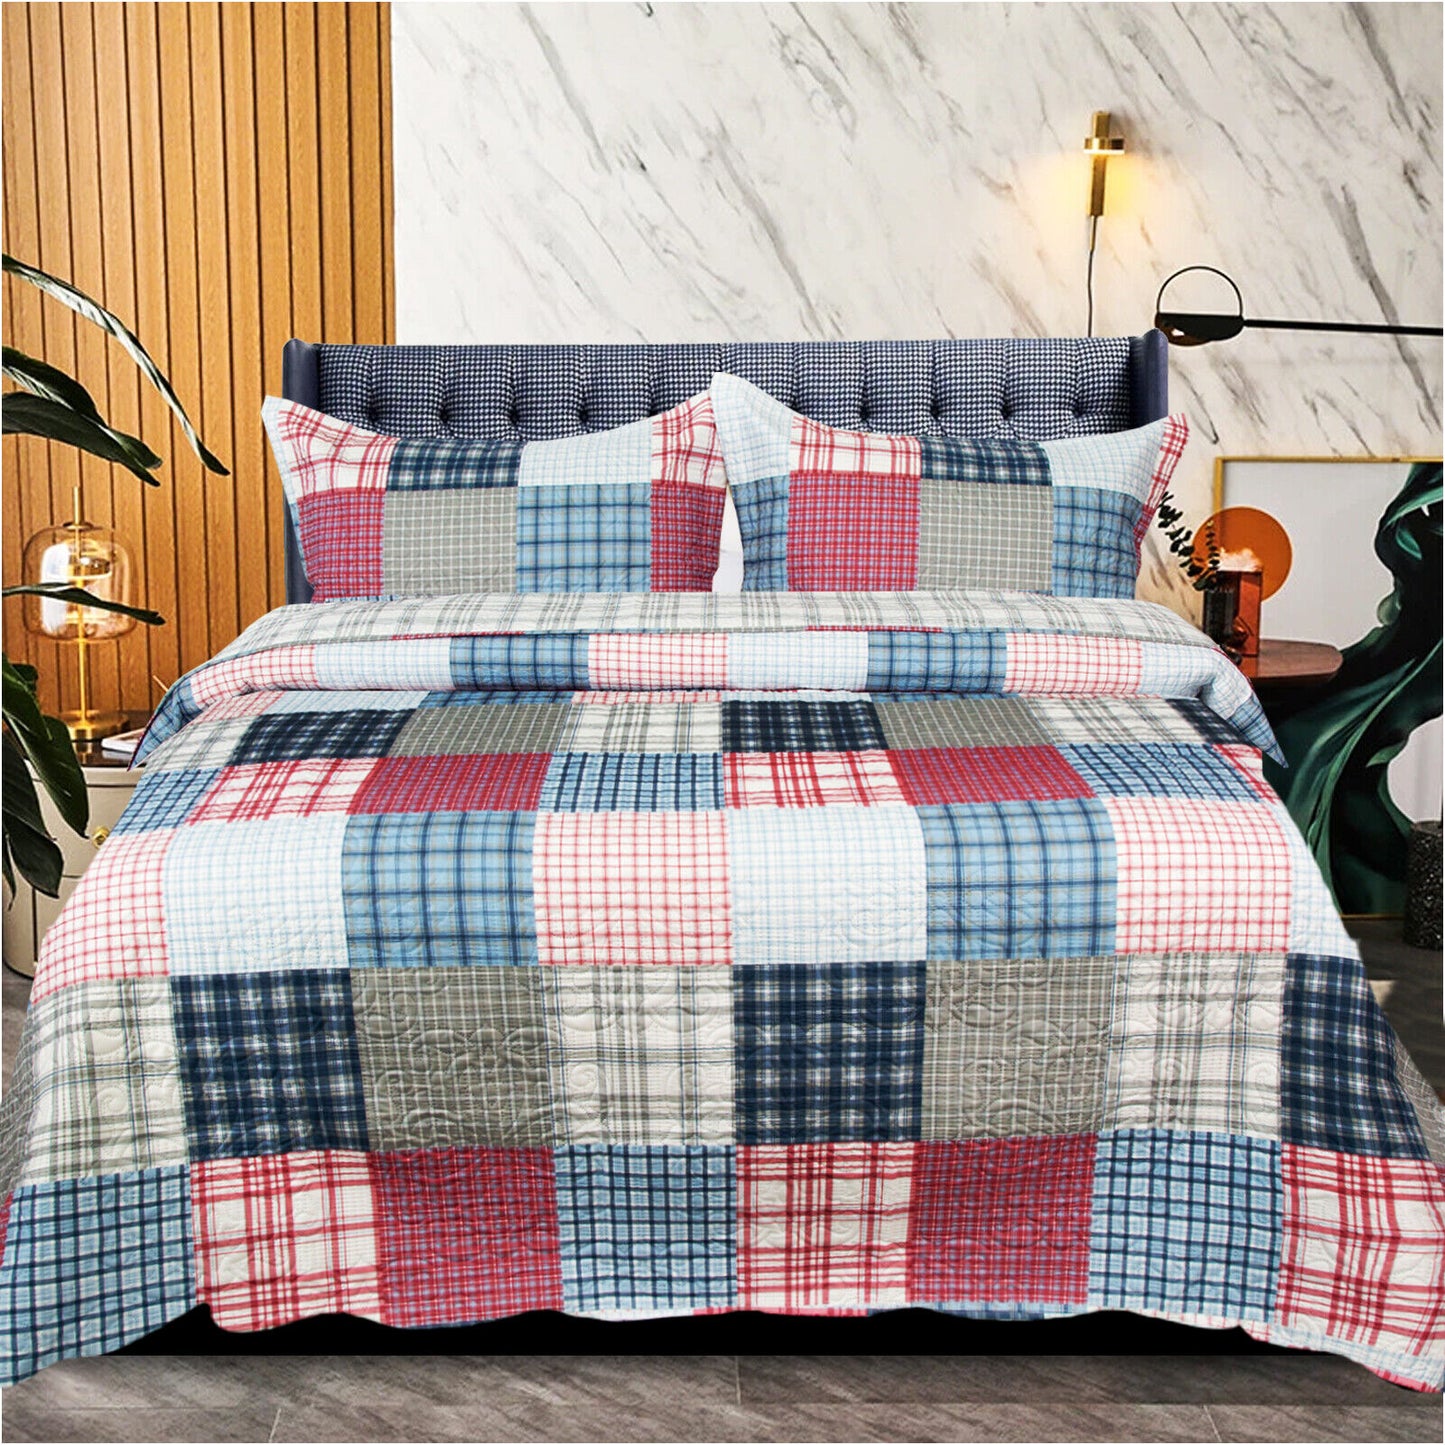 3 Piece Quilted Patchwork Bedspread Throw Single Double King Size Bedding Set